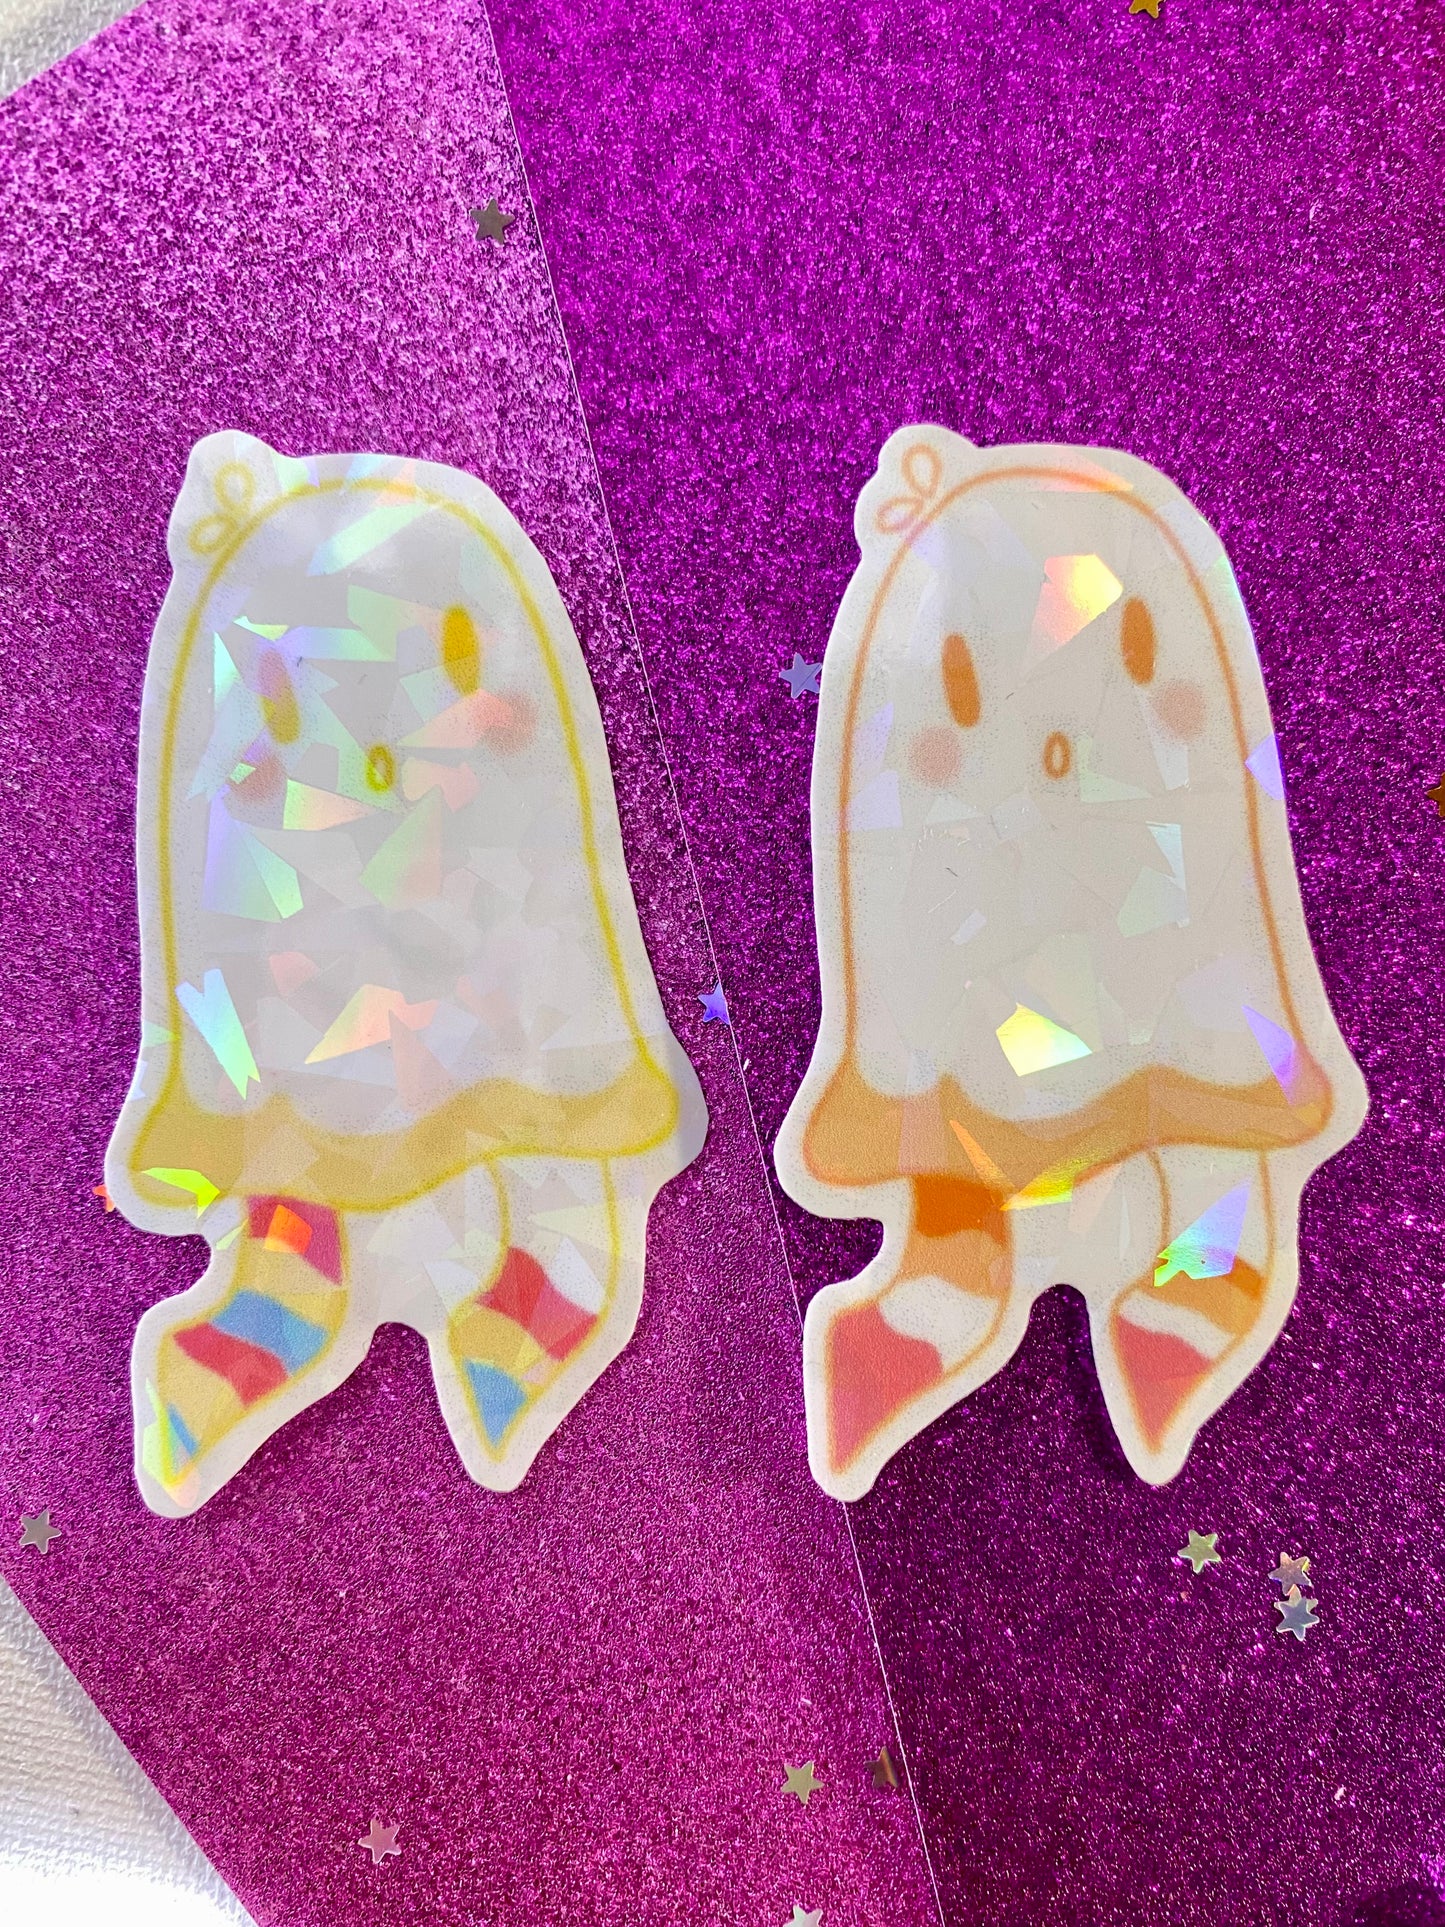 Holographic LGBTQ+ Ghost Stickers